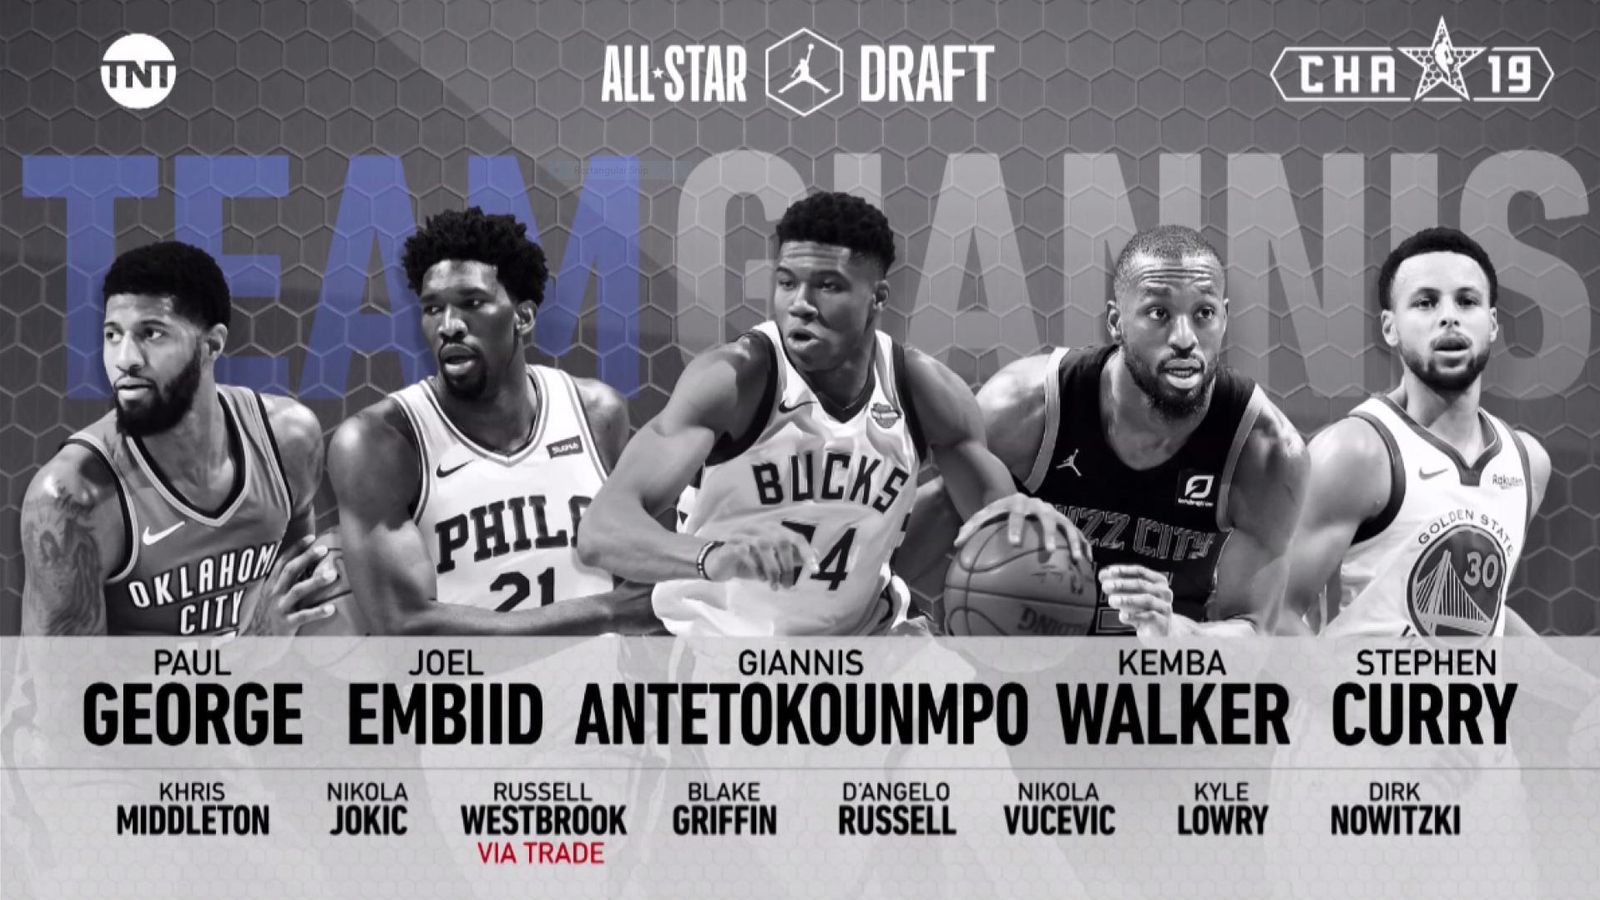 WATCH The best plays made by Team Giannis ahead of the 2019 AllStar